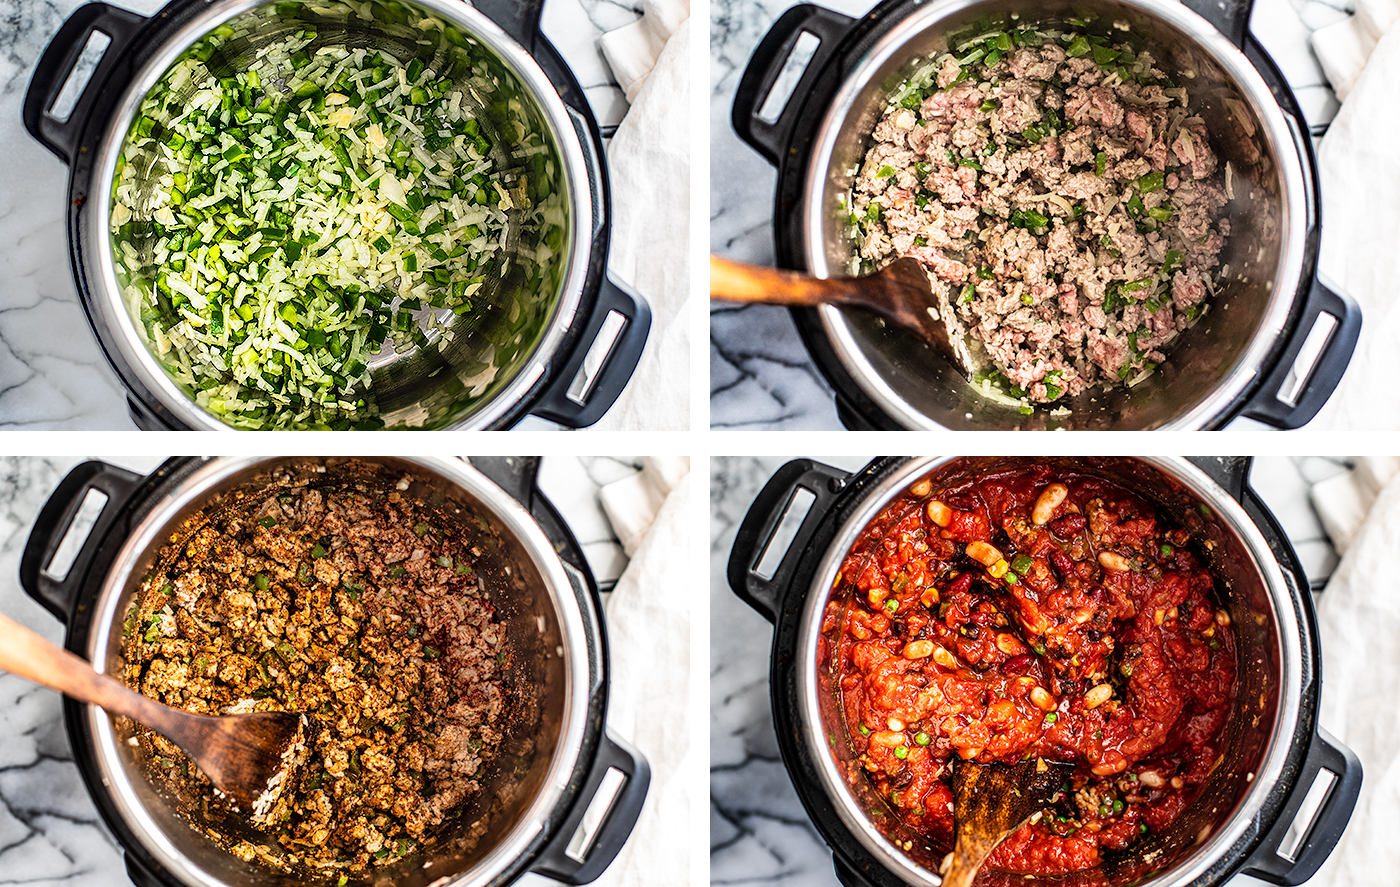 Collage of four process photos of chili ingredients being cooked in the Instant Pot.